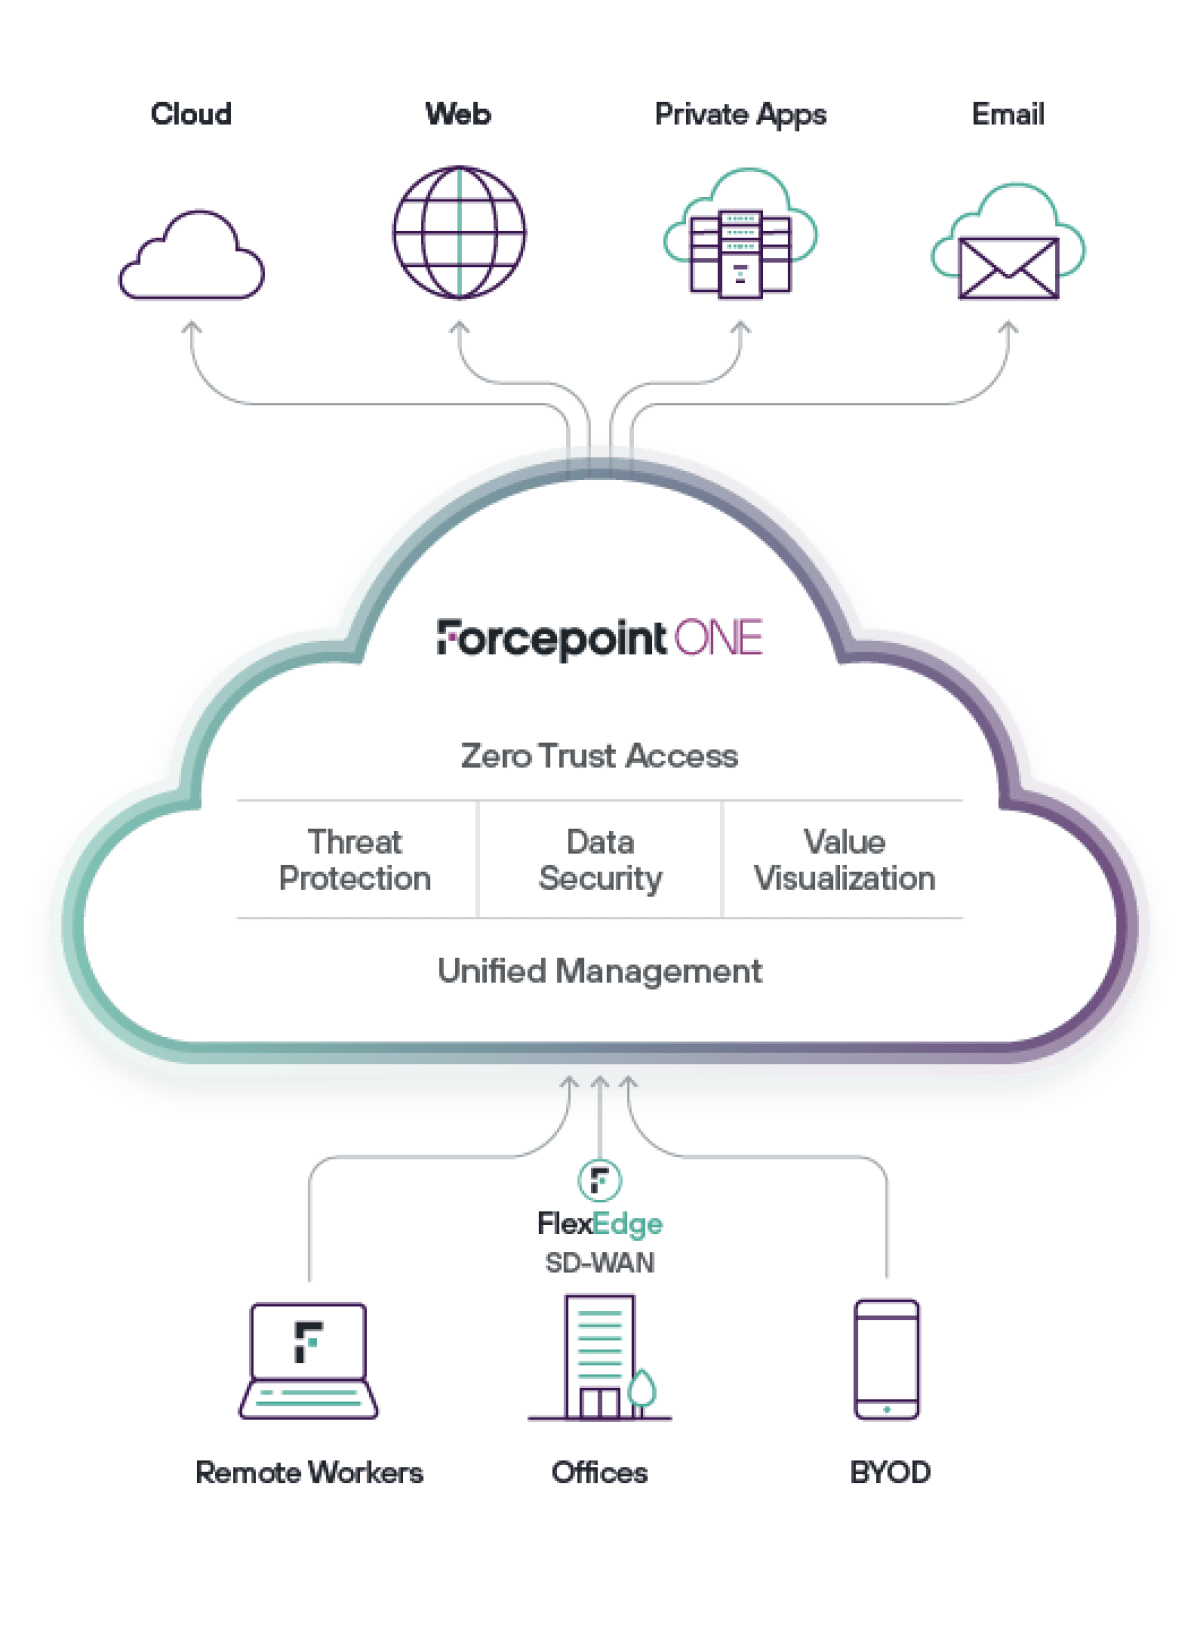 Forcepoint ONE Zero Trust Network Access (ZTNA) is part of the Forcepoint ONE cloud security platform.